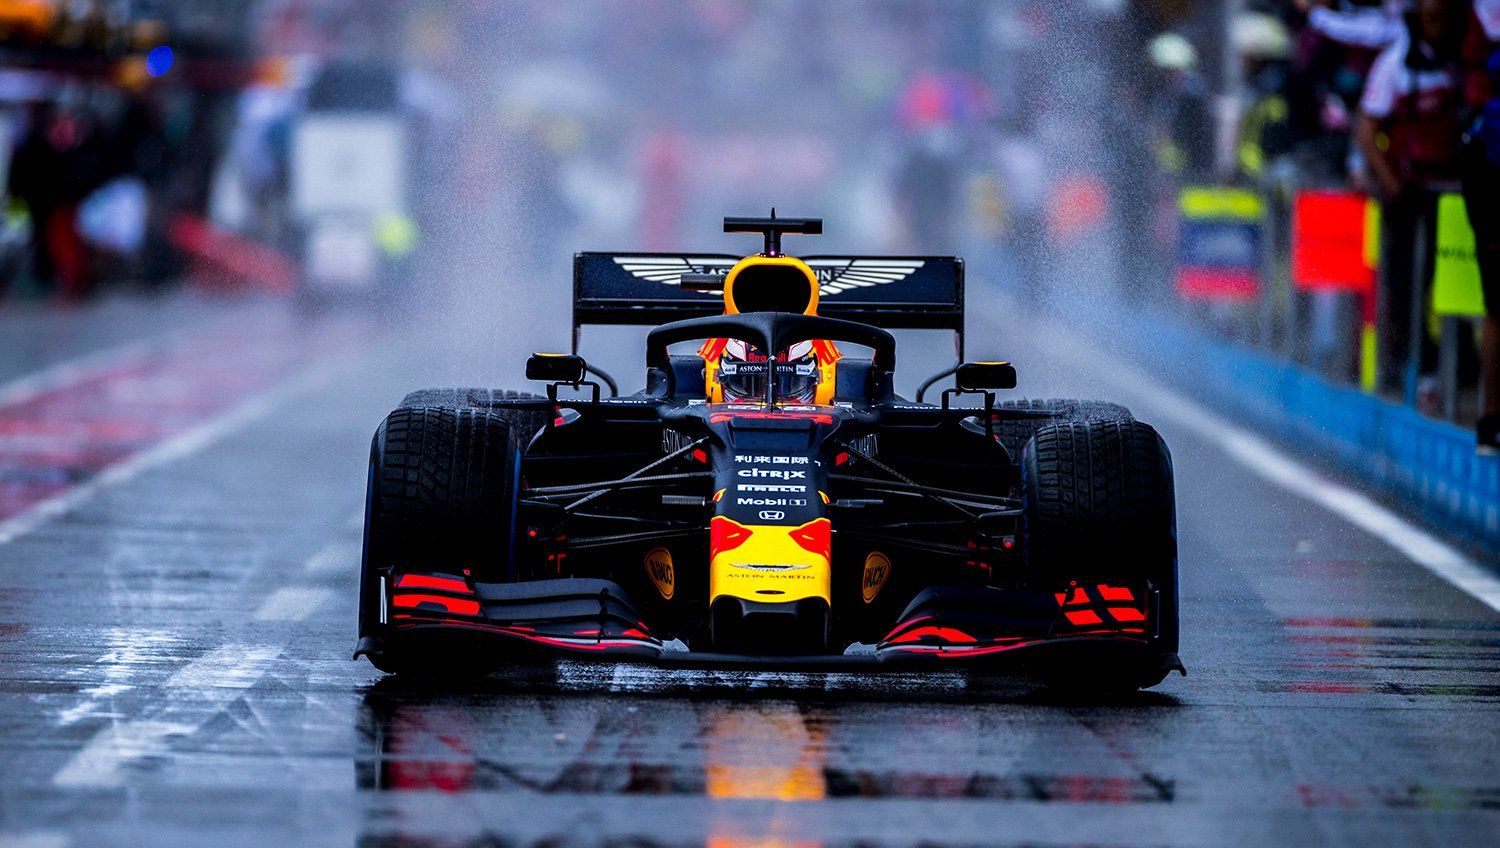 Red Bull sets another world record for fastest pit stop